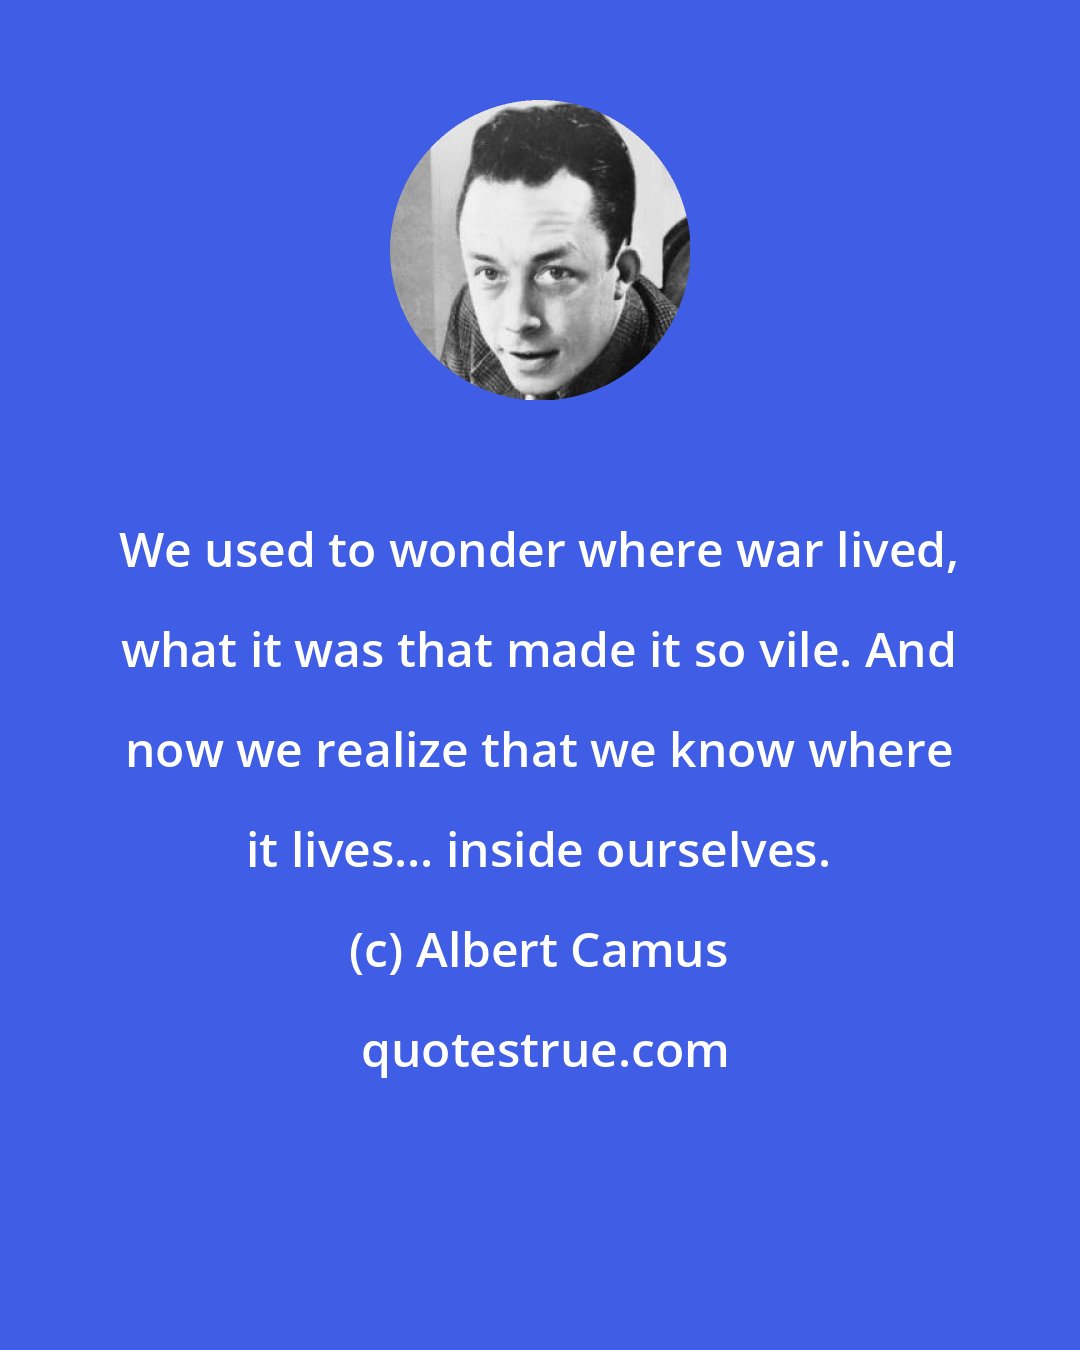 Albert Camus: We used to wonder where war lived, what it was that made it so vile. And now we realize that we know where it lives... inside ourselves.